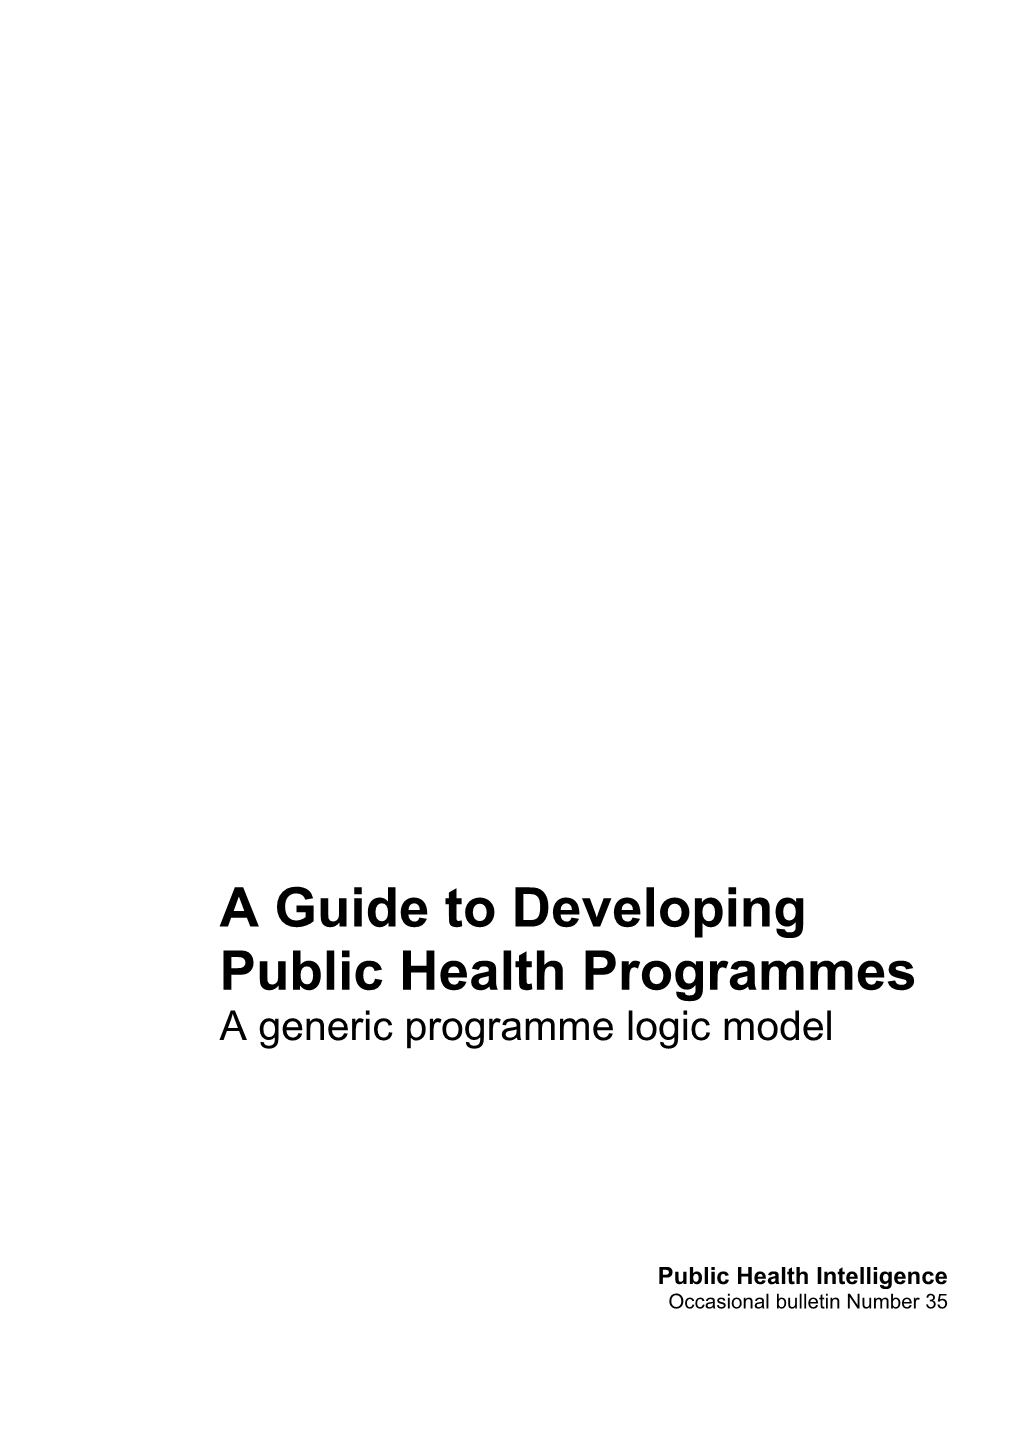 A Guide to Developing Public Health Programmes